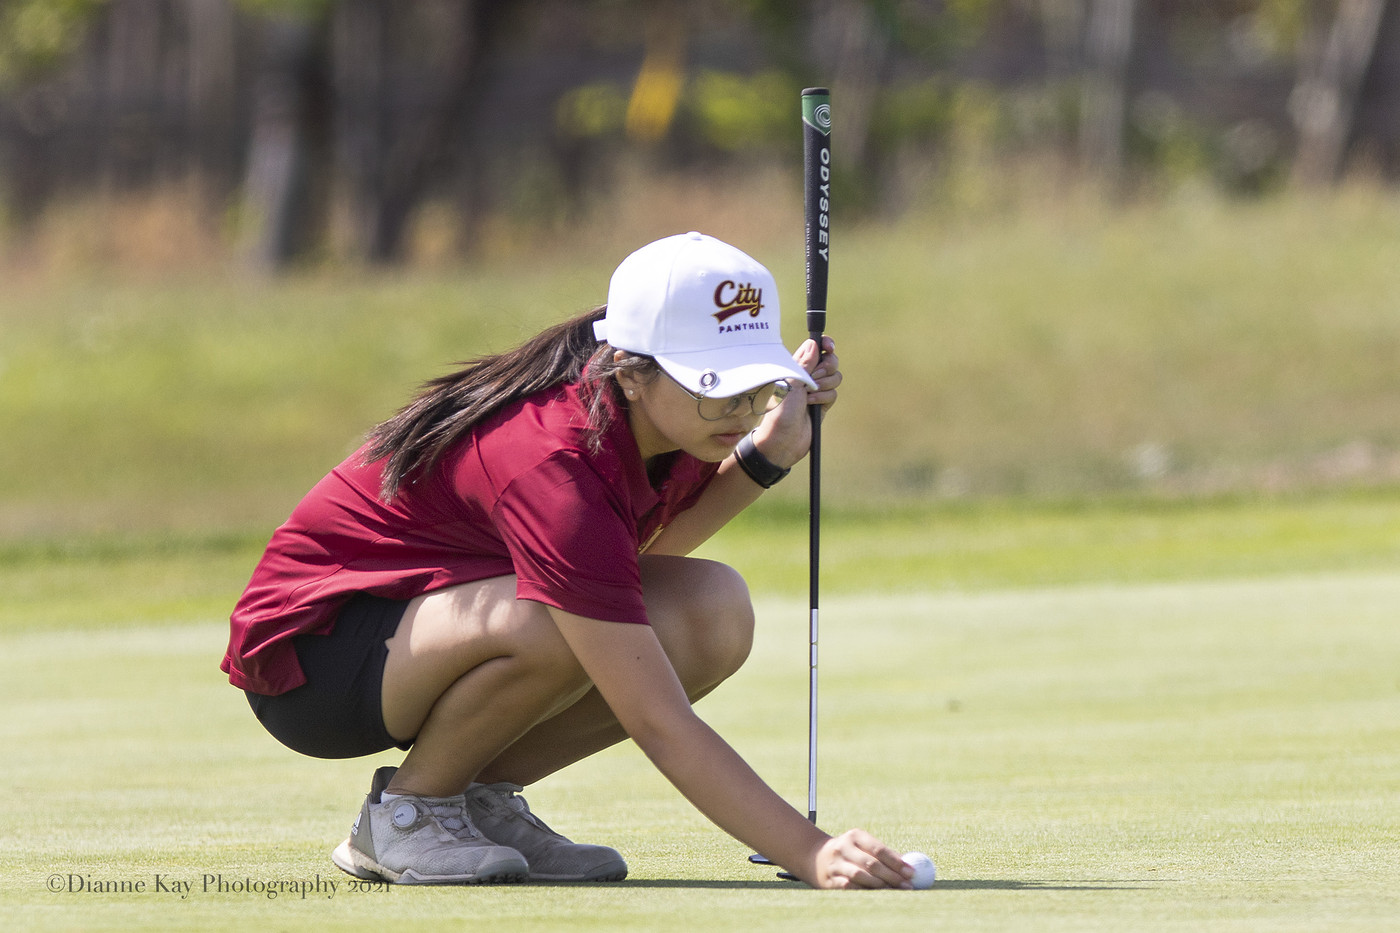 Panthers finish 7th at Big 8 Tournament #1; Vang leads City with a 96 in her round